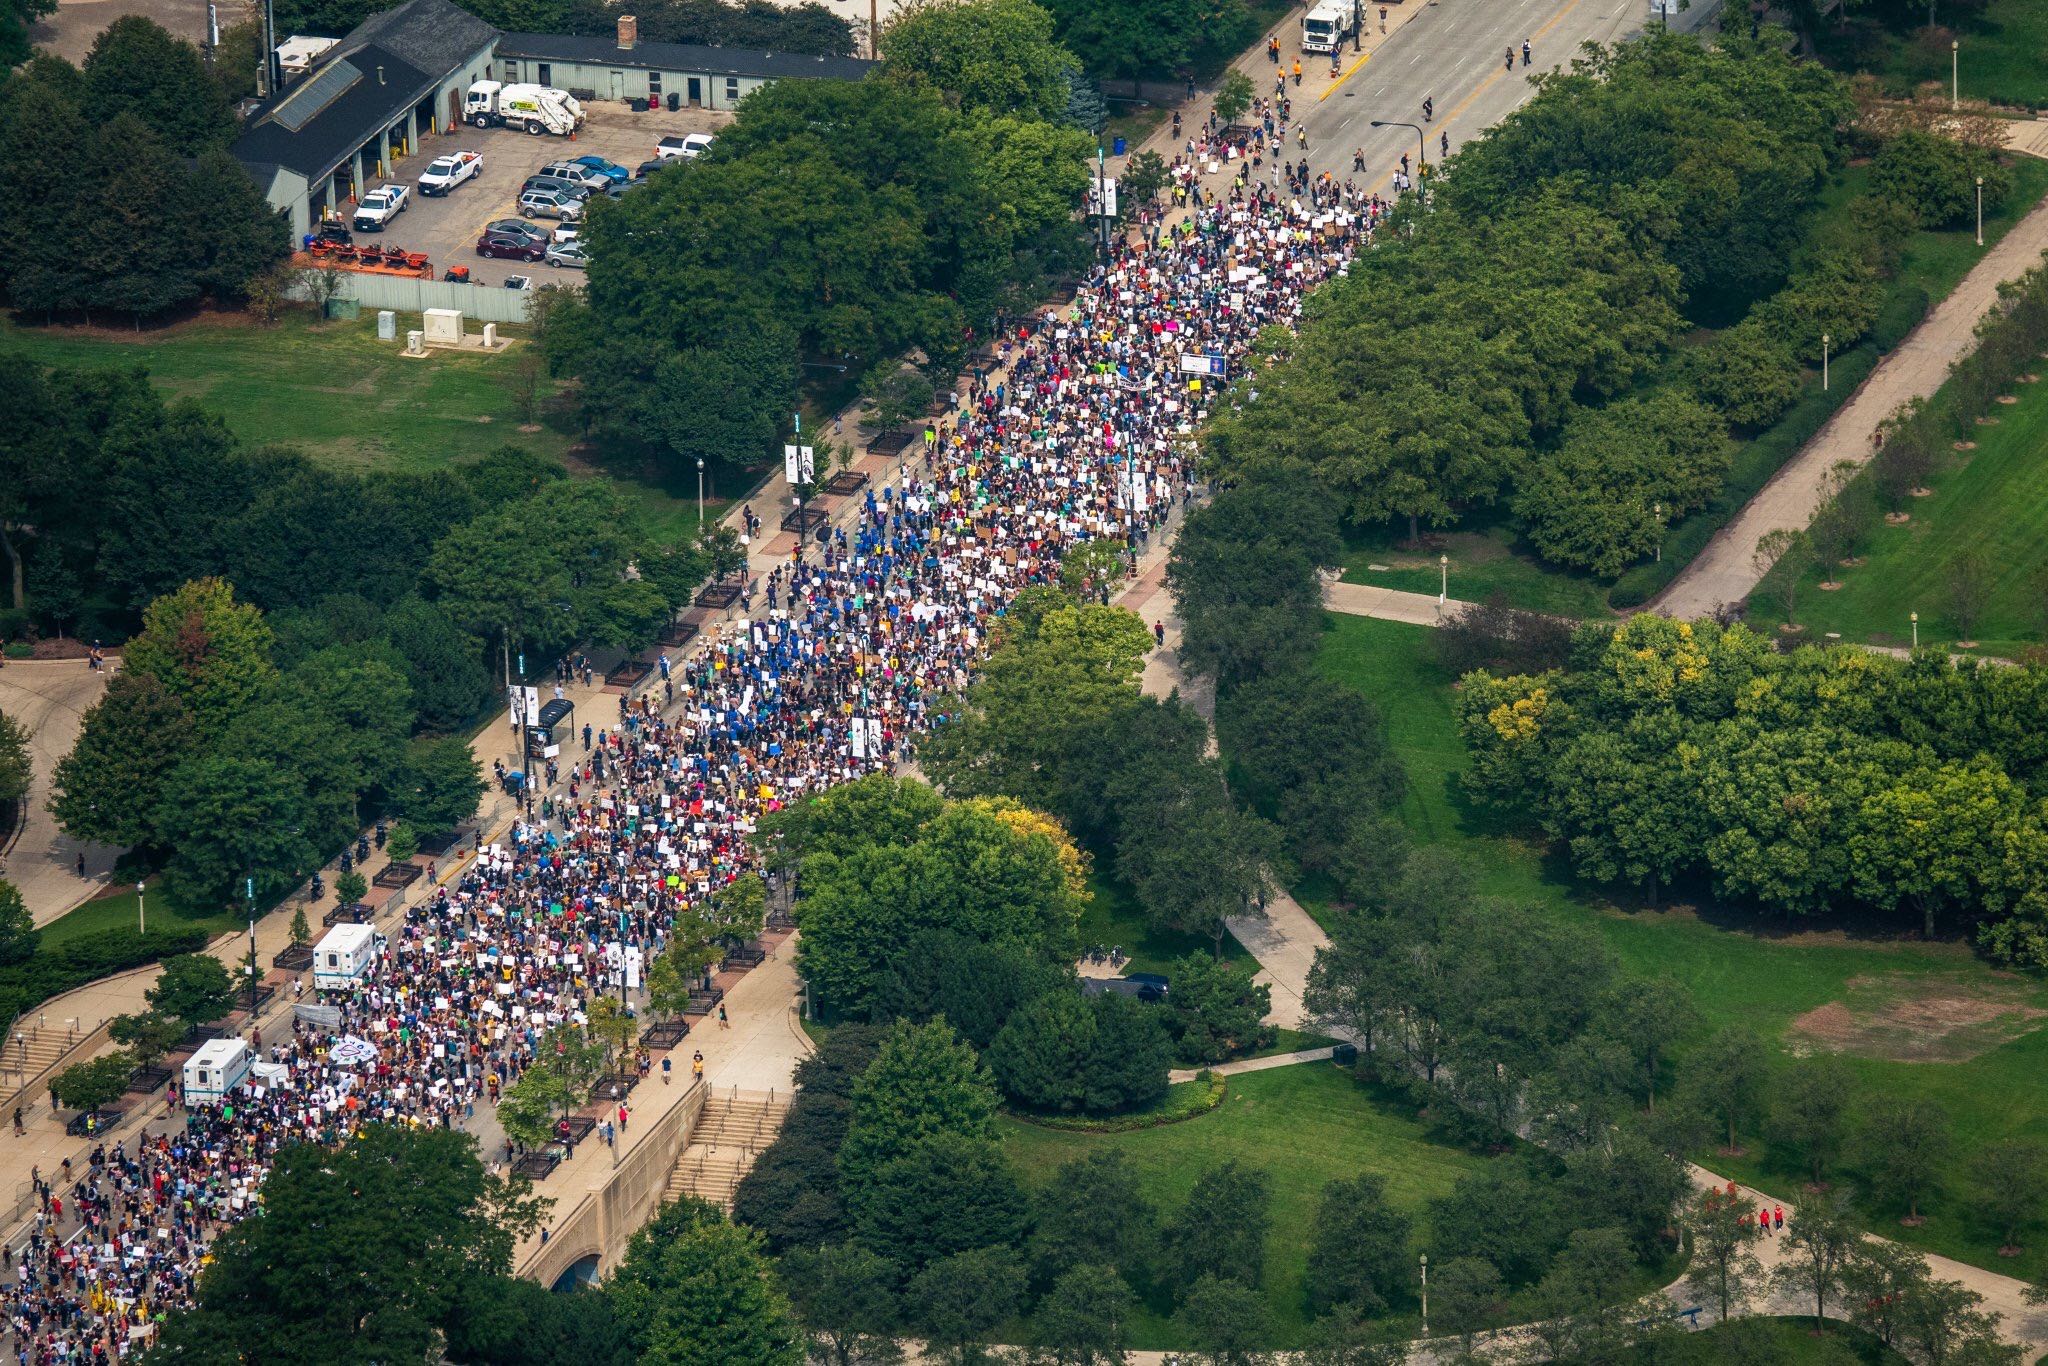 An aerial shot of a crowd of climate strikers marching down the street in Chicago, IL, USA.